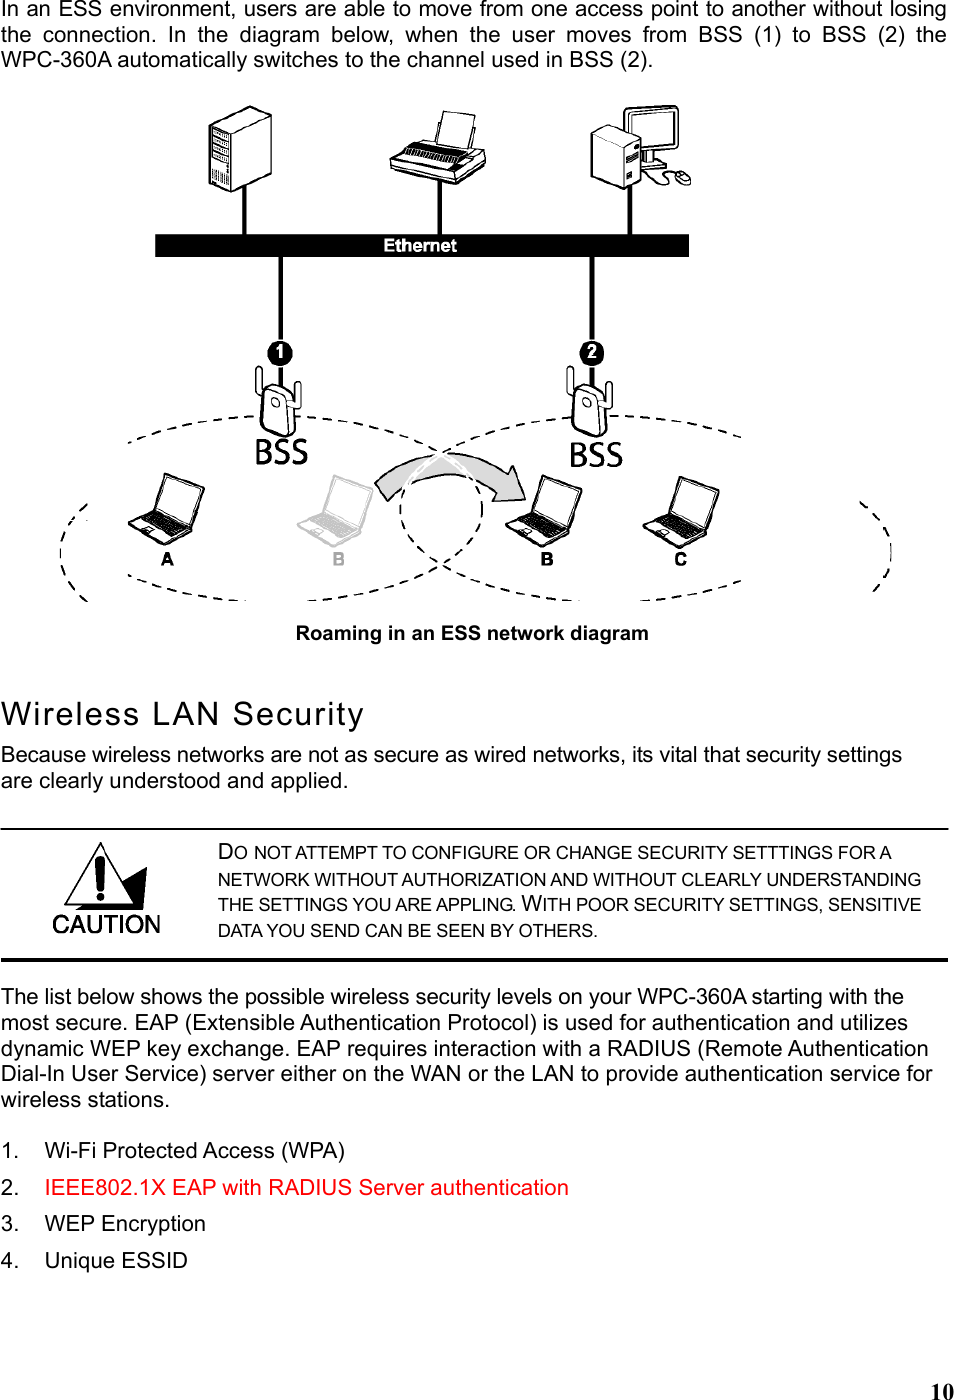  10In an ESS environment, users are able to move from one access point to another without losing the connection. In the diagram below, when the user moves from BSS (1) to BSS (2) the WPC-360A automatically switches to the channel used in BSS (2). Wireless LAN Security Because wireless networks are not as secure as wired networks, its vital that security settings are clearly understood and applied. The list below shows the possible wireless security levels on your WPC-360A starting with the most secure. EAP (Extensible Authentication Protocol) is used for authentication and utilizes dynamic WEP key exchange. EAP requires interaction with a RADIUS (Remote Authentication Dial-In User Service) server either on the WAN or the LAN to provide authentication service for wireless stations.  1.  Wi-Fi Protected Access (WPA) 2.  IEEE802.1X EAP with RADIUS Server authentication 3. WEP Encryption 4. Unique ESSID  Roaming in an ESS network diagram  DO NOT ATTEMPT TO CONFIGURE OR CHANGE SECURITY SETTTINGS FOR A NETWORK WITHOUT AUTHORIZATION AND WITHOUT CLEARLY UNDERSTANDING THE SETTINGS YOU ARE APPLING. WITH POOR SECURITY SETTINGS, SENSITIVE DATA YOU SEND CAN BE SEEN BY OTHERS. 